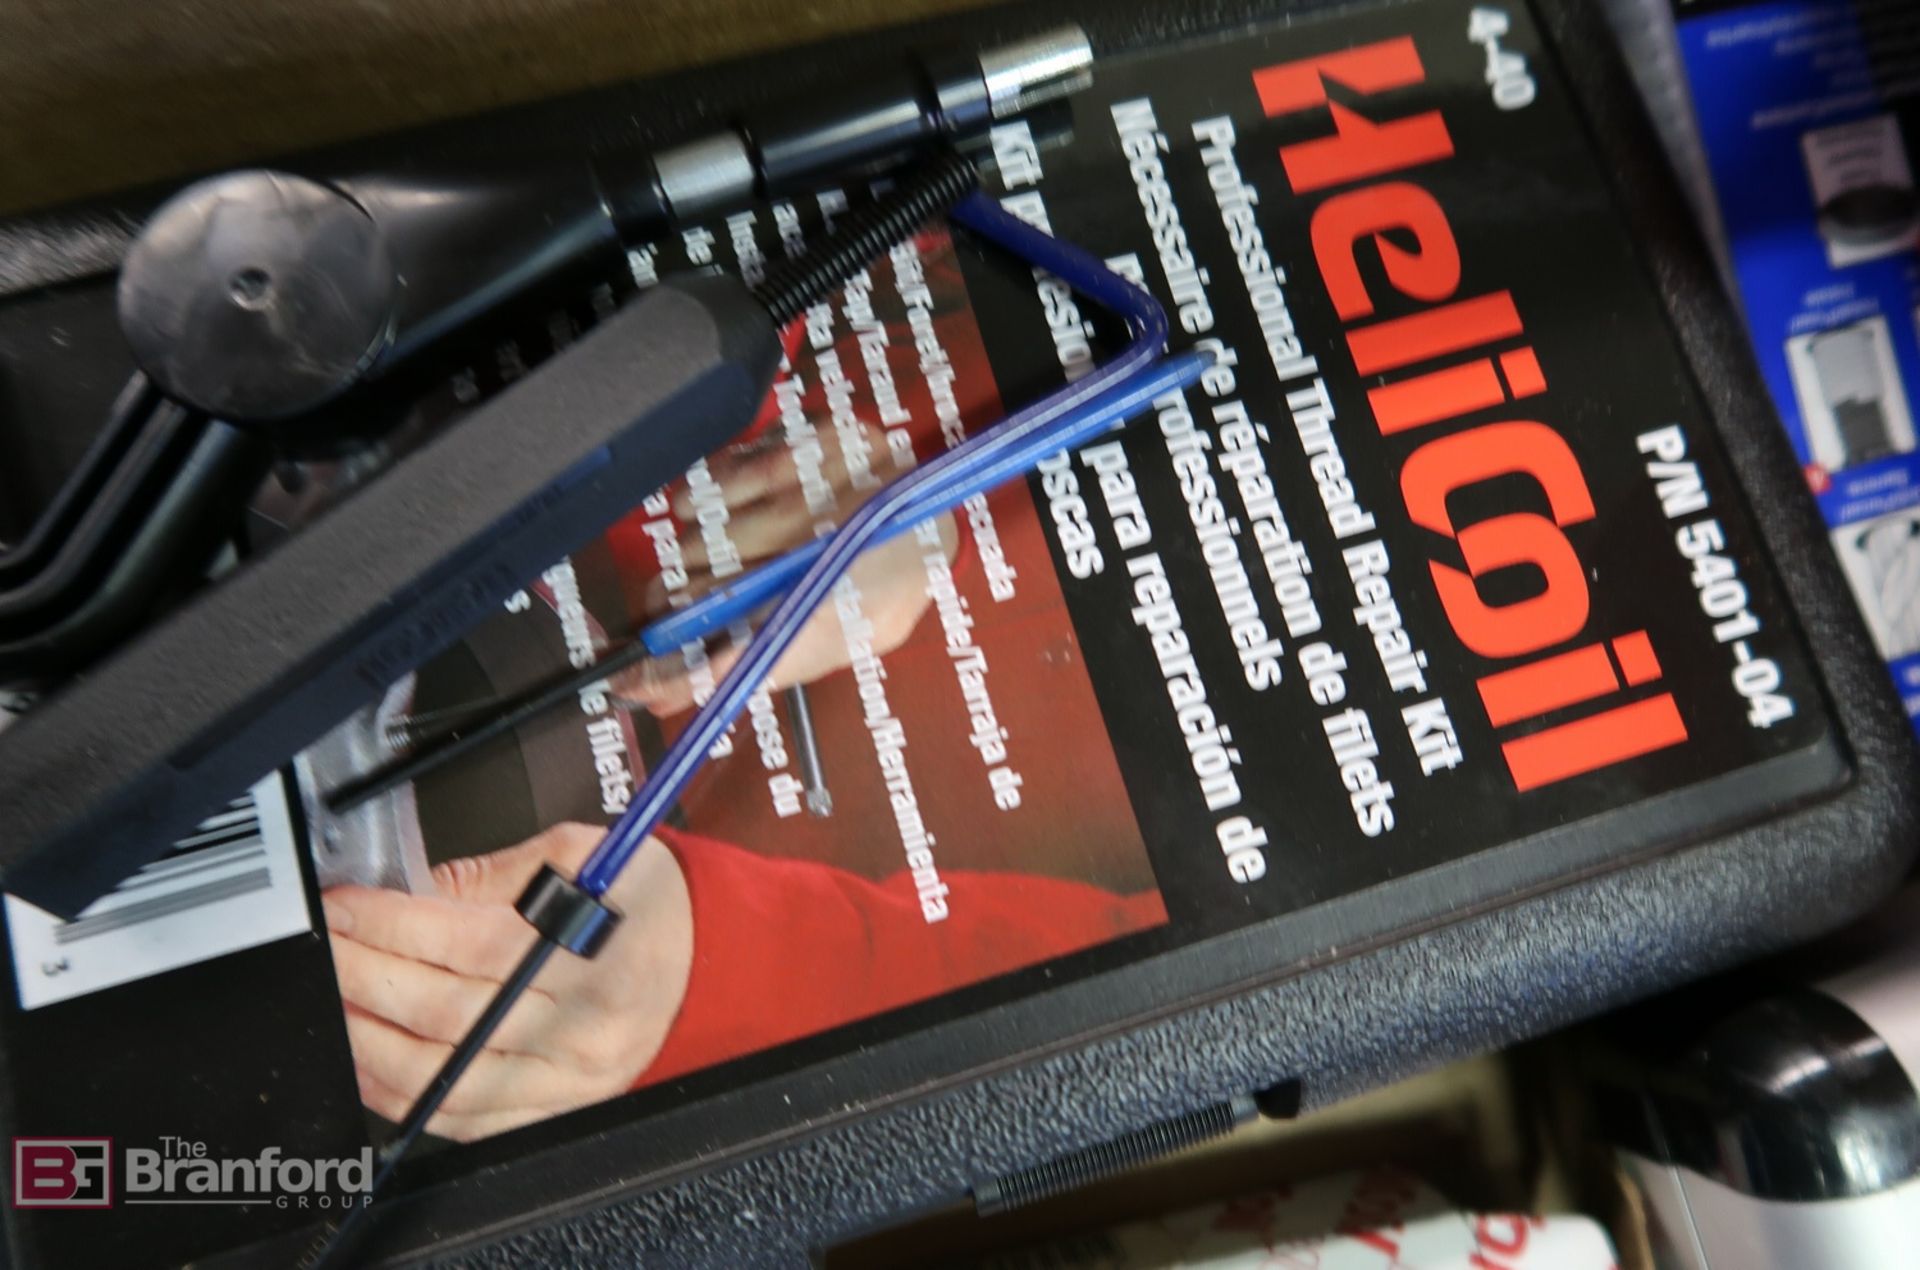 Box w/ Helicoil Thread Repair Kit, Hanson Extractor & Drill Sets, Helicoils - Image 4 of 4